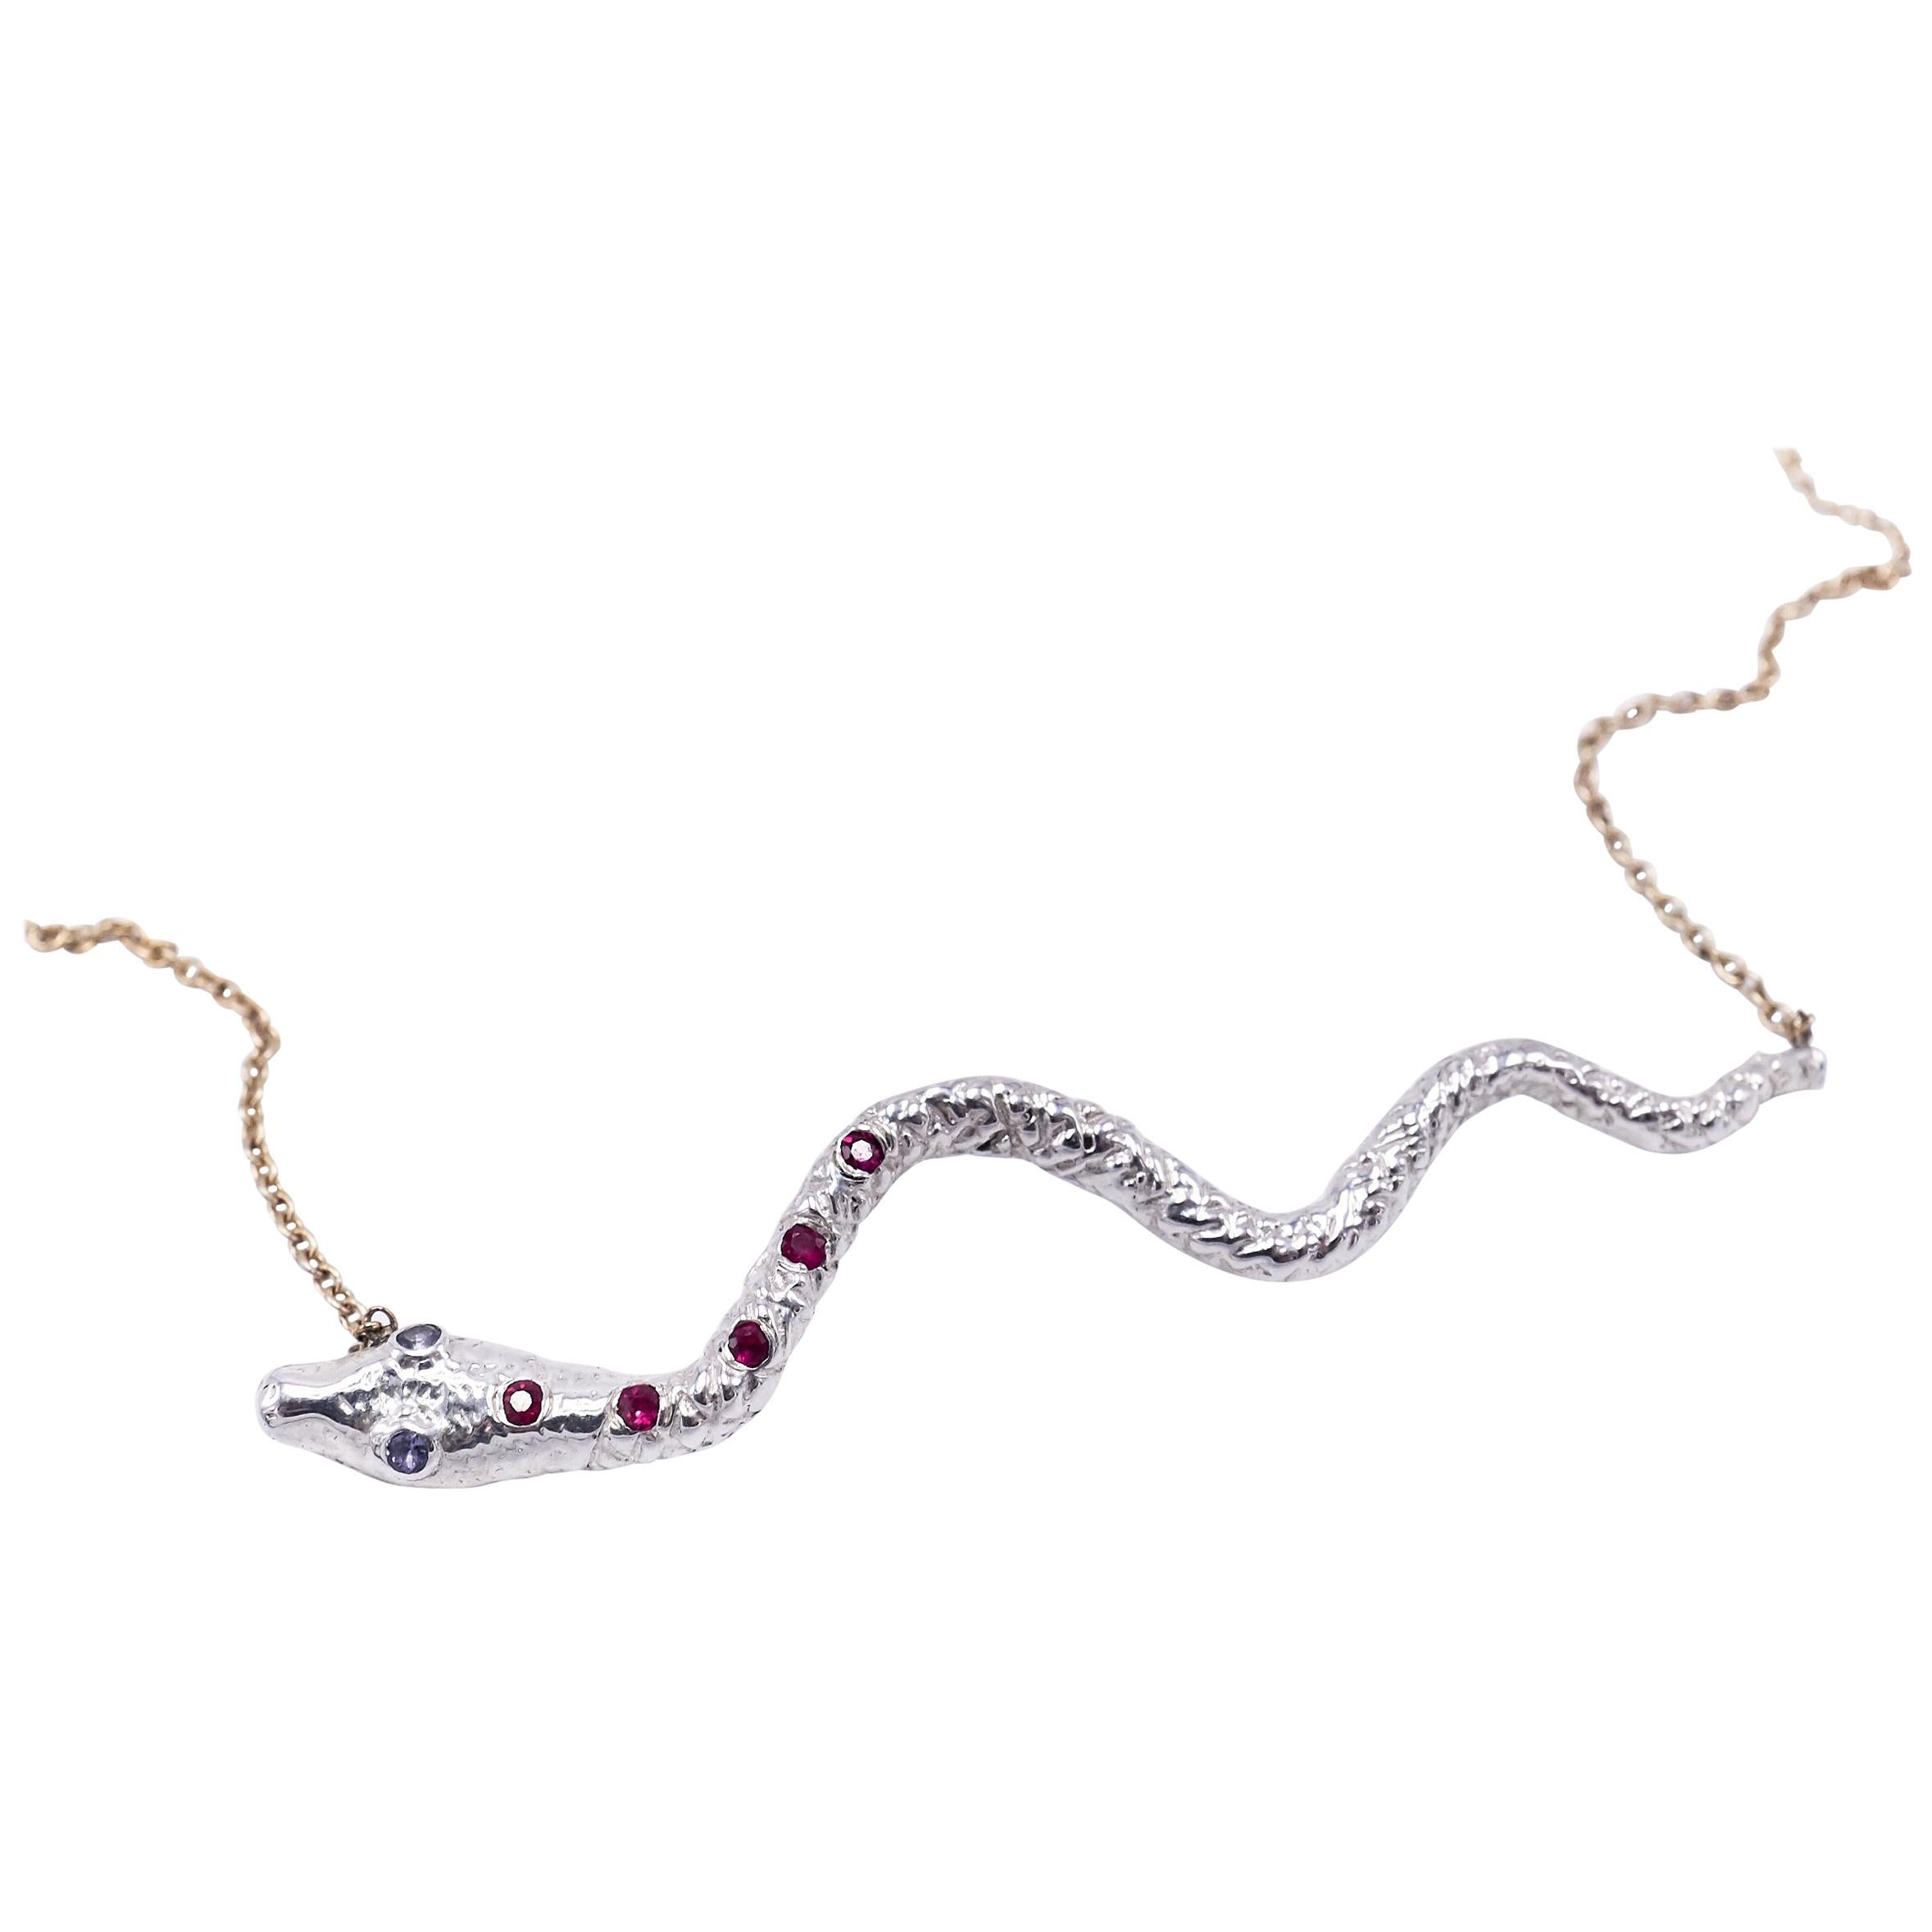 5 Ruby 2 Iolite Eyes Silver Snake Pendant Gold Filled Choker Chain Necklace J Dauphin

J DAUPHIN short necklace 